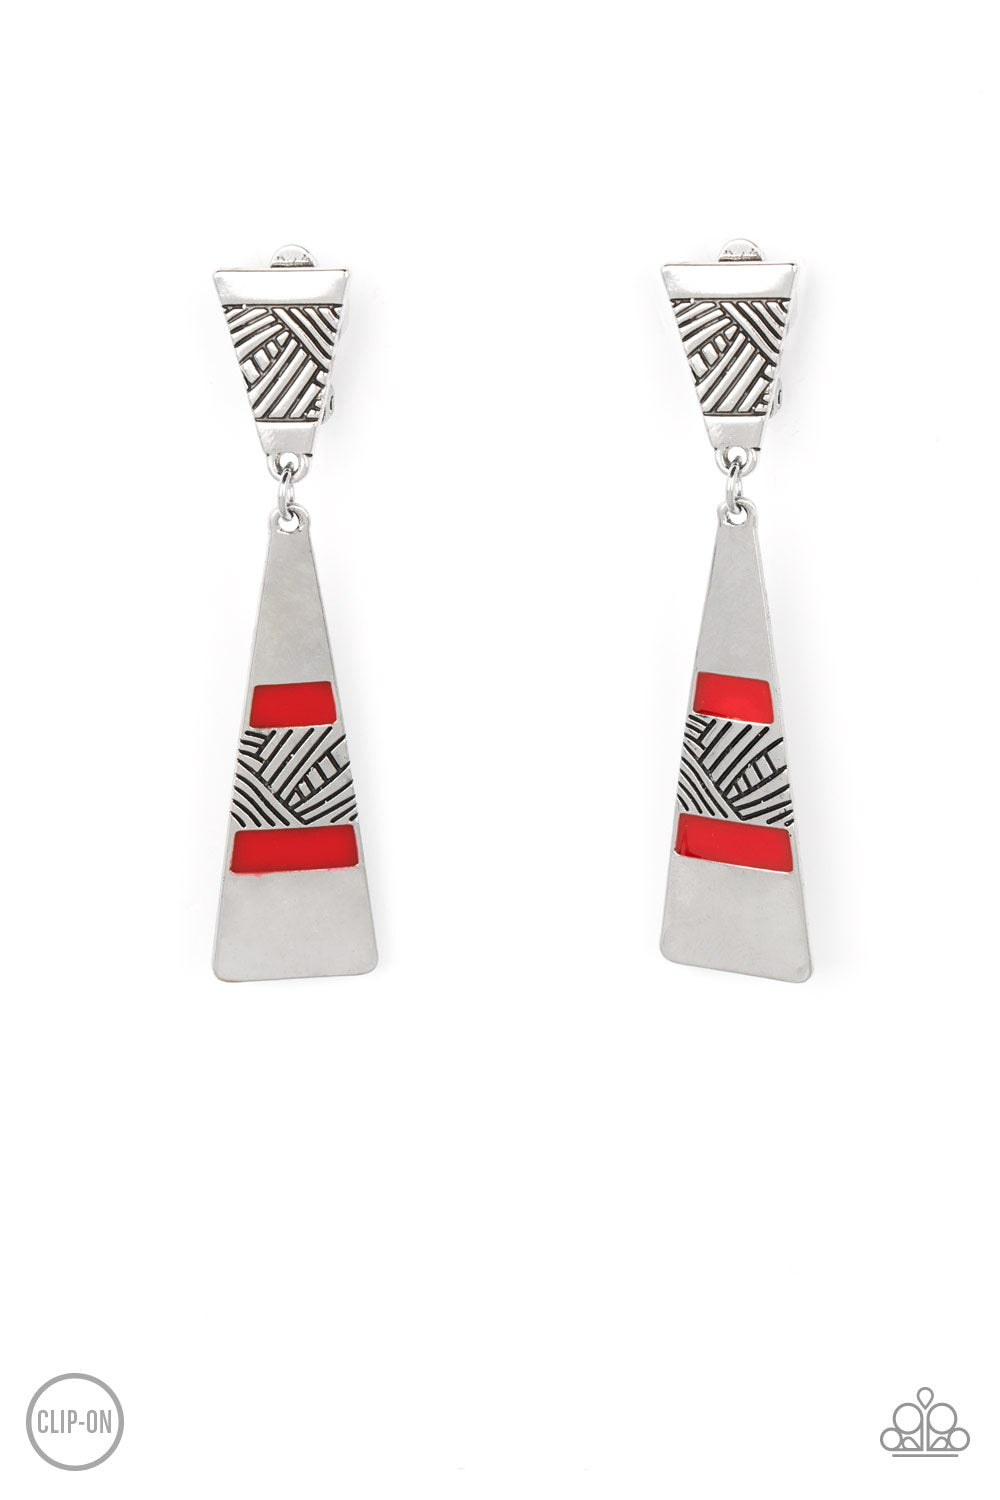 Safari Seeker Red Clip-On Earring - Paparazzi Accessories  Etched in sections of slanted textile-like patterns, two antiqued triangular silver frames link into an edgy lure. The lowermost frame is painted in rows of shiny red accents, adding a fiery pop of color to the adventurous display. Earring attaches to a standard clip-on fitting.  Sold as one pair of clip-on earrings.